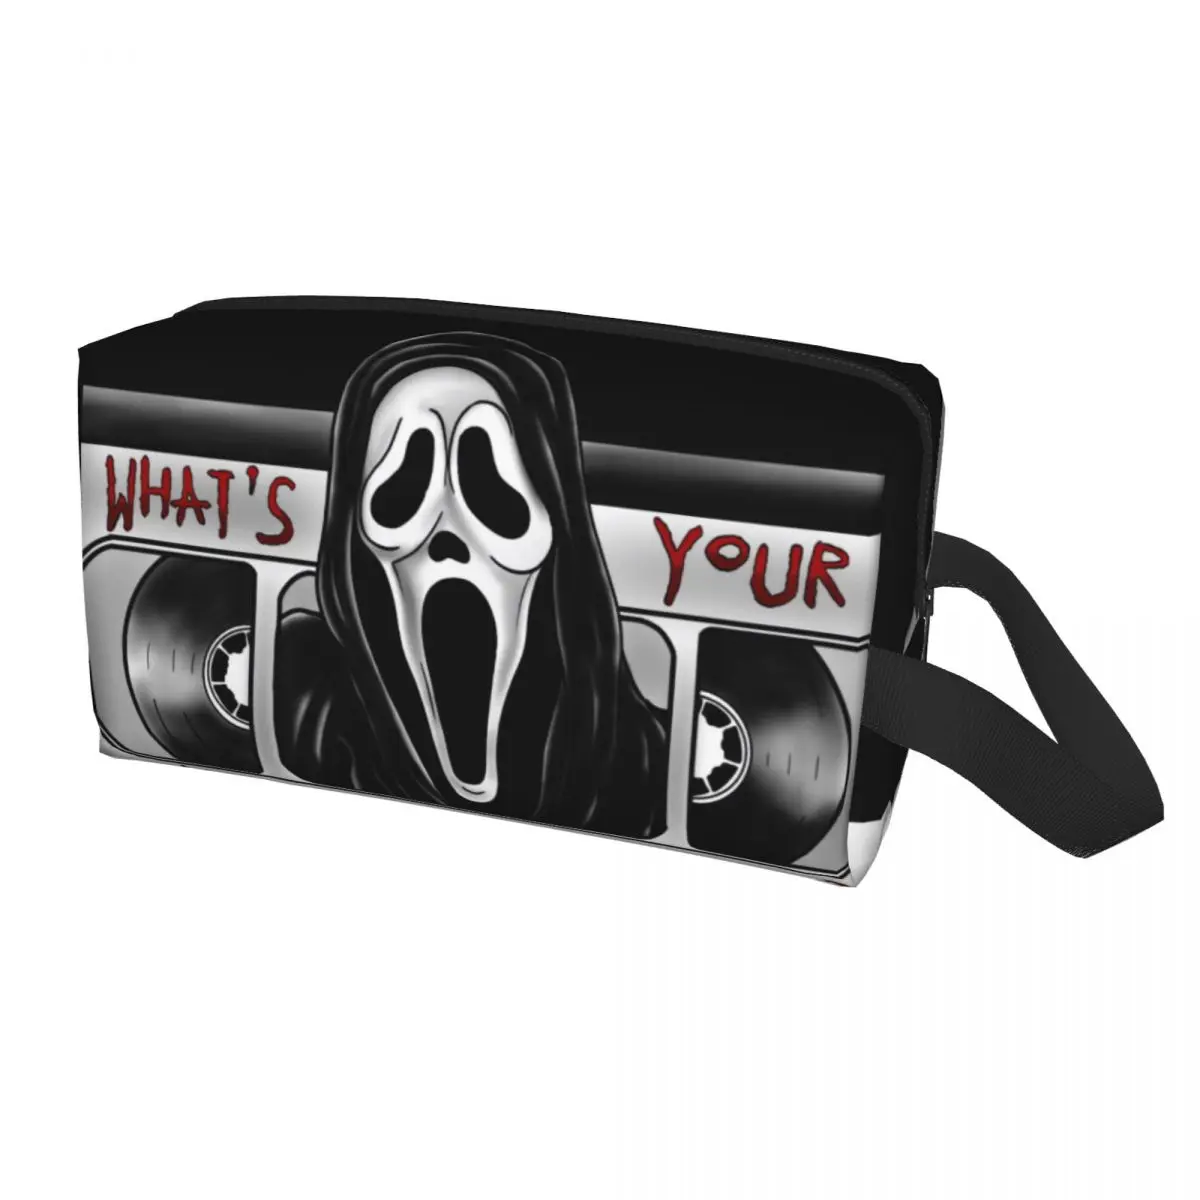 

What's Your Favorite Scary Movie Toiletry Bag Halloween Scream Ghost Makeup Cosmetic Organizer Lady Beauty Storage Dopp Kit Box